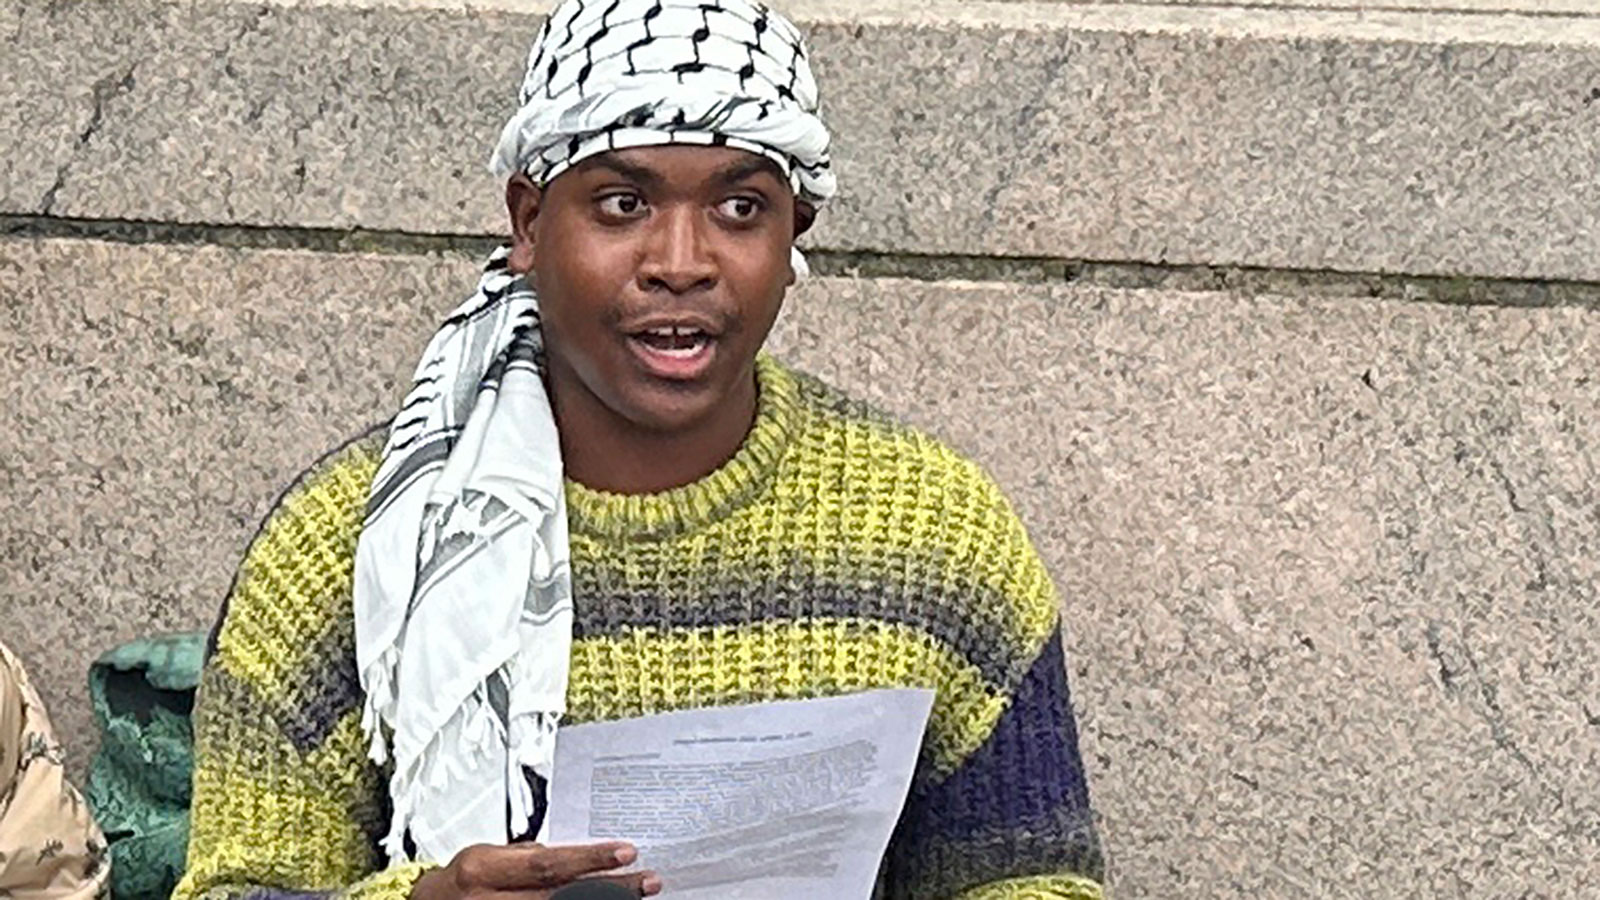 Demonstration leader Khymani James address the media outside a tent camp on the campus of Columbia University in New York on Wednesday, April 24.